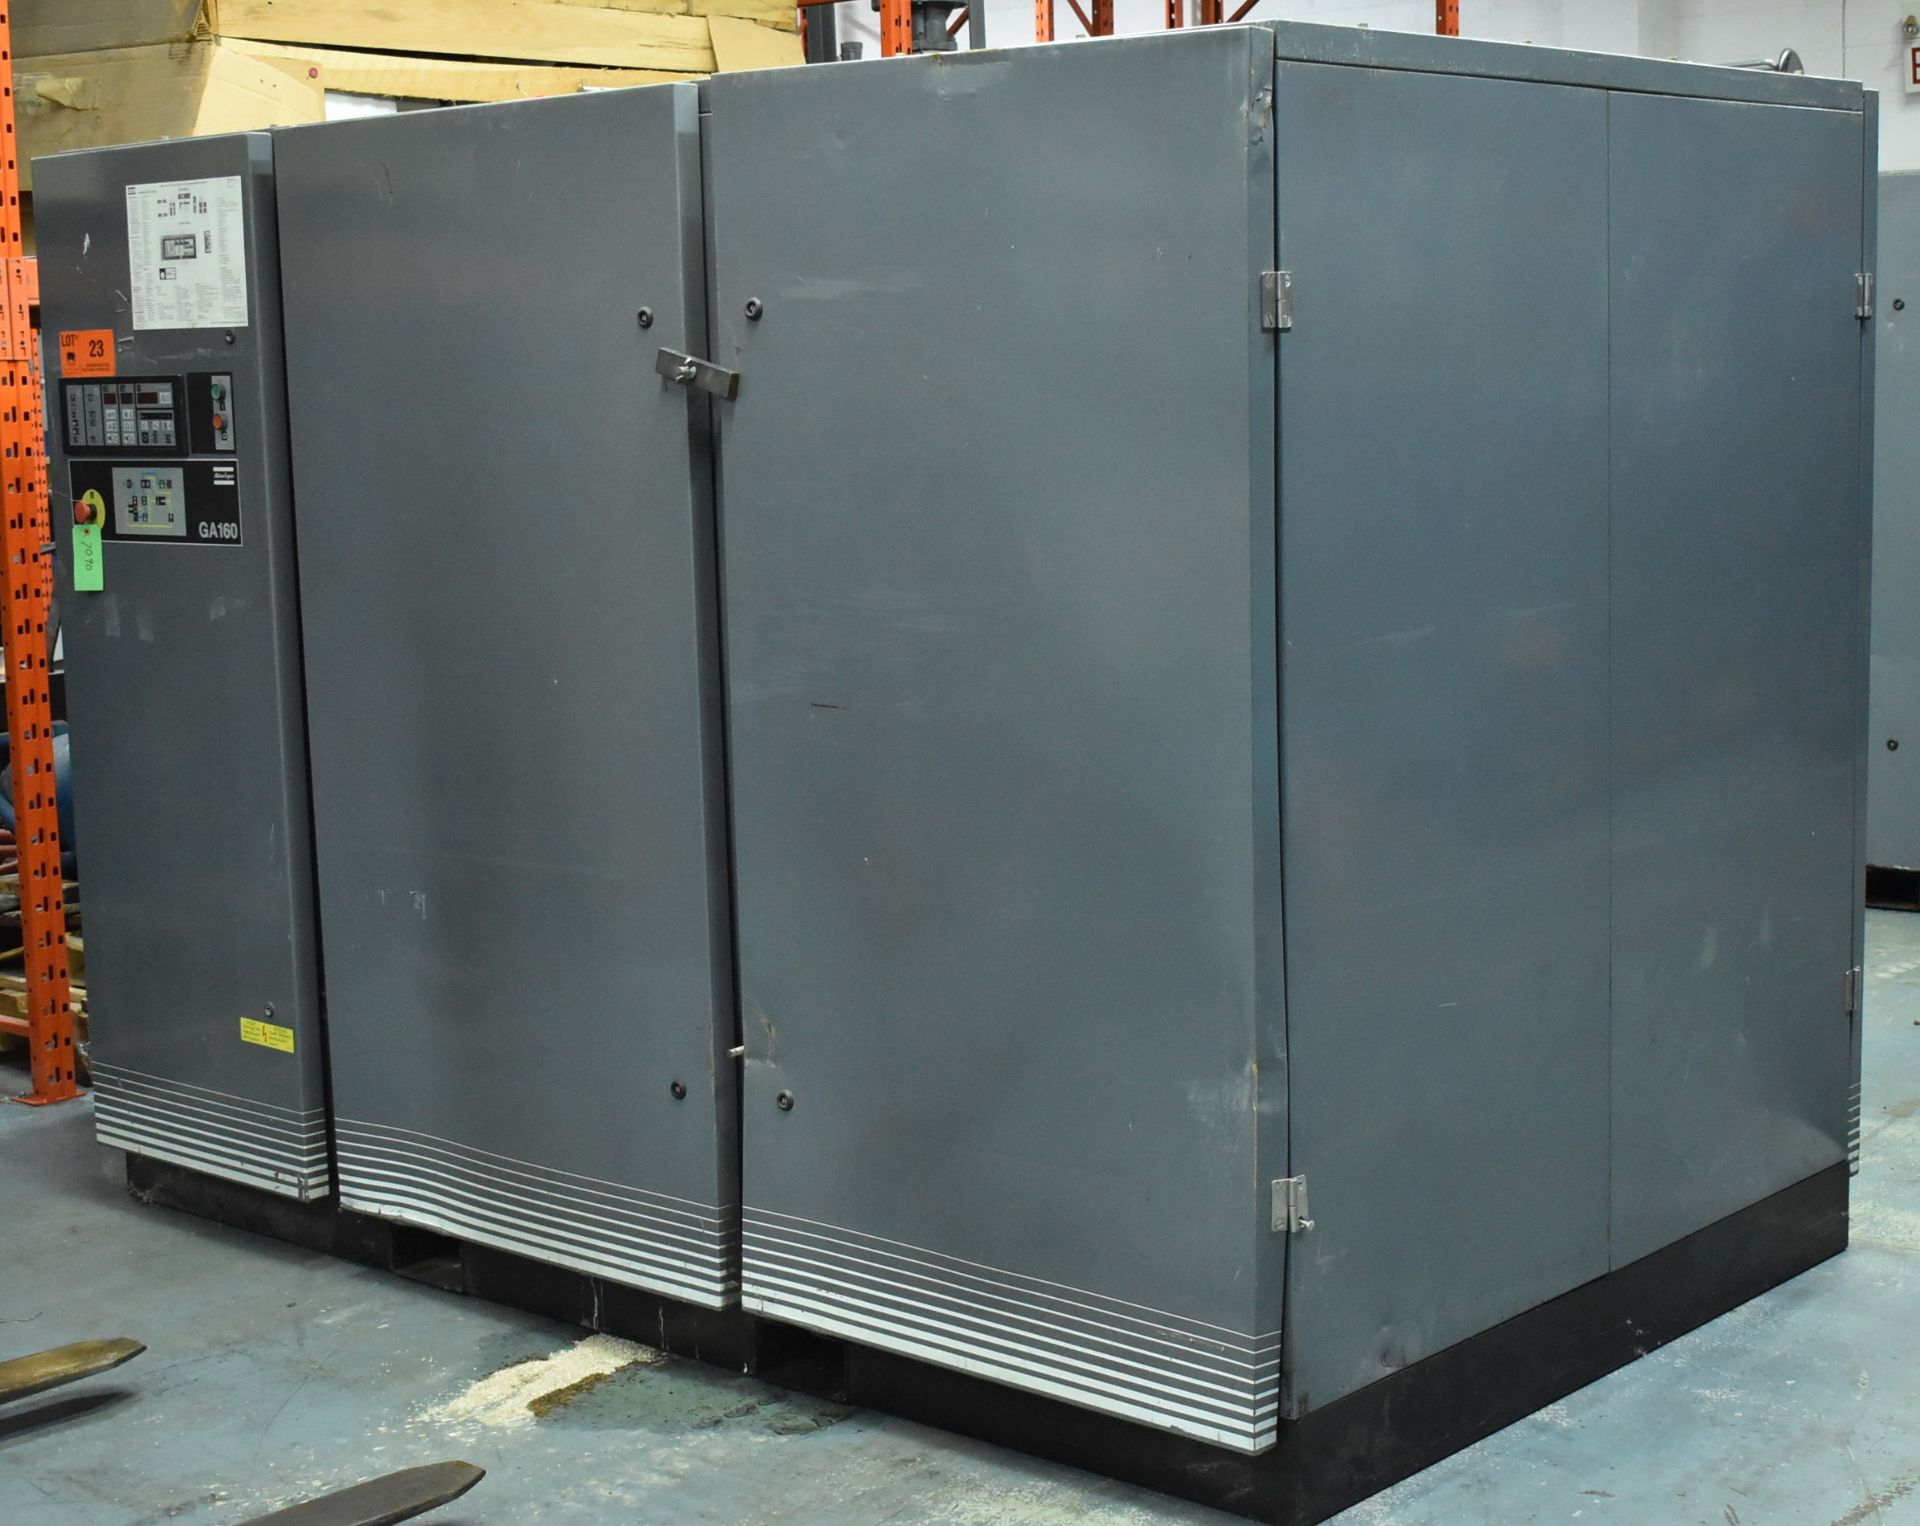 ATLAS COPCO GA160 ROTARY SCREW AIR COMPRESSOR WITH 200 HP, 157 PSI, S/N: AIF.018745 (CI) [RIGGING - Image 2 of 10